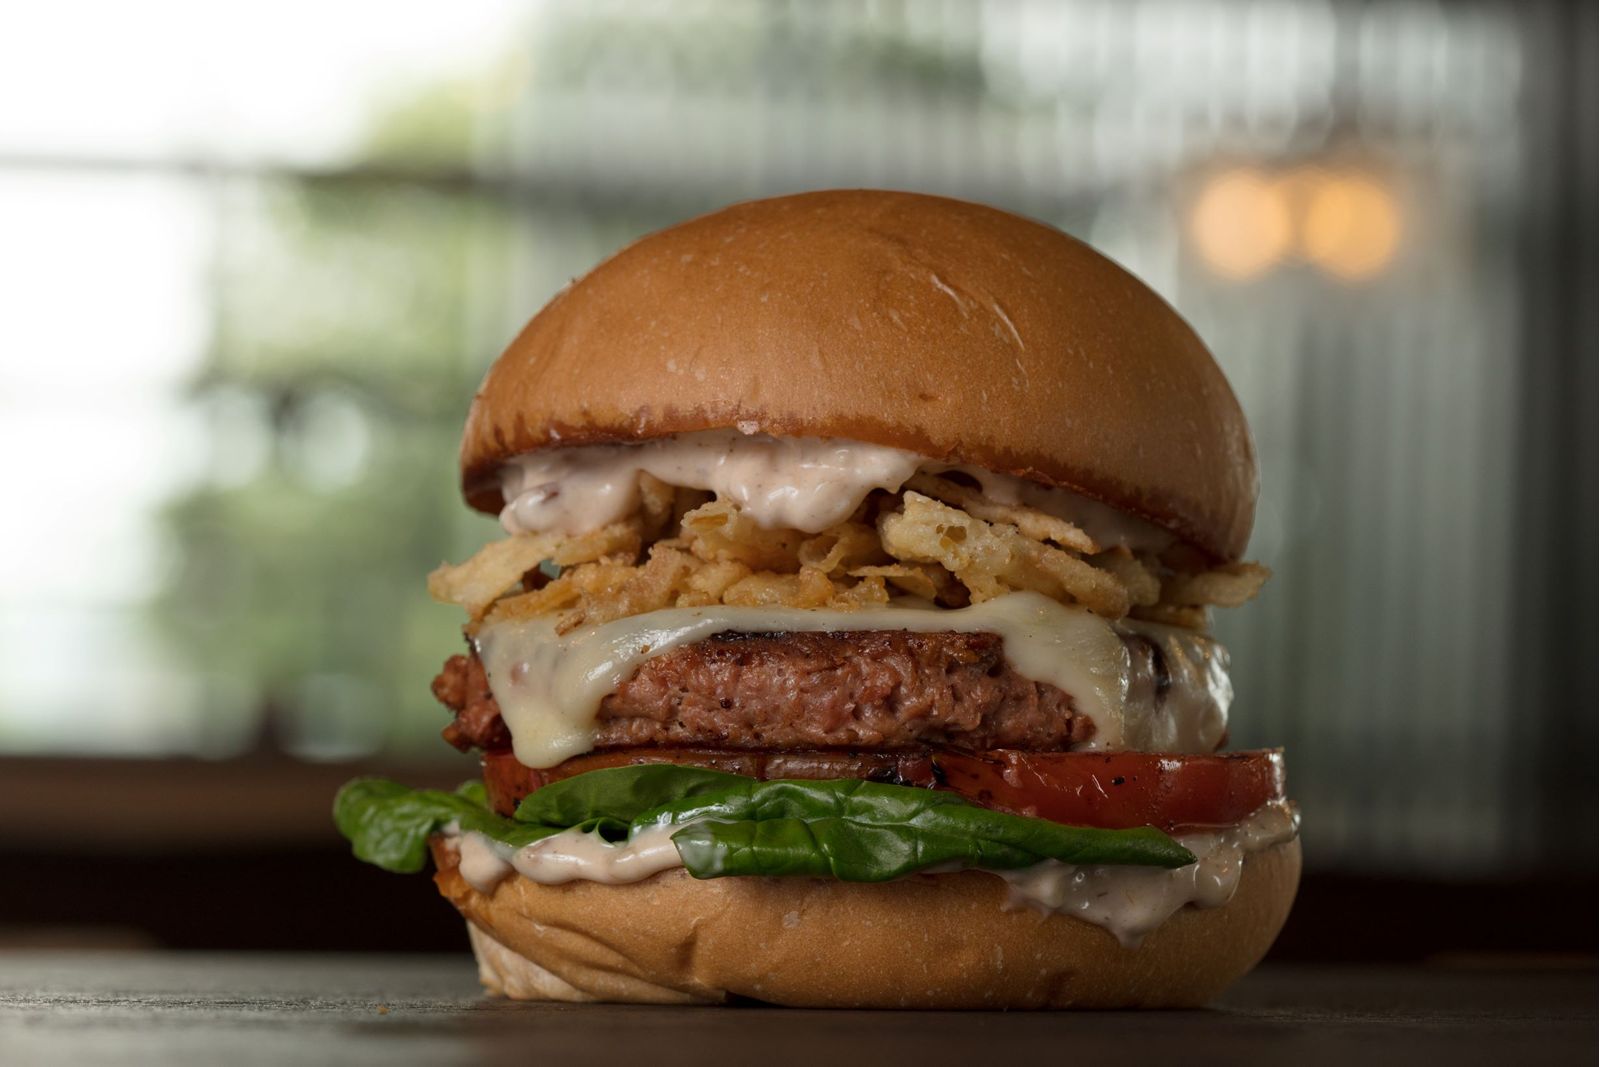 Grub Partners with Beyond Meat for 'Maverick' Plant-Based Burger